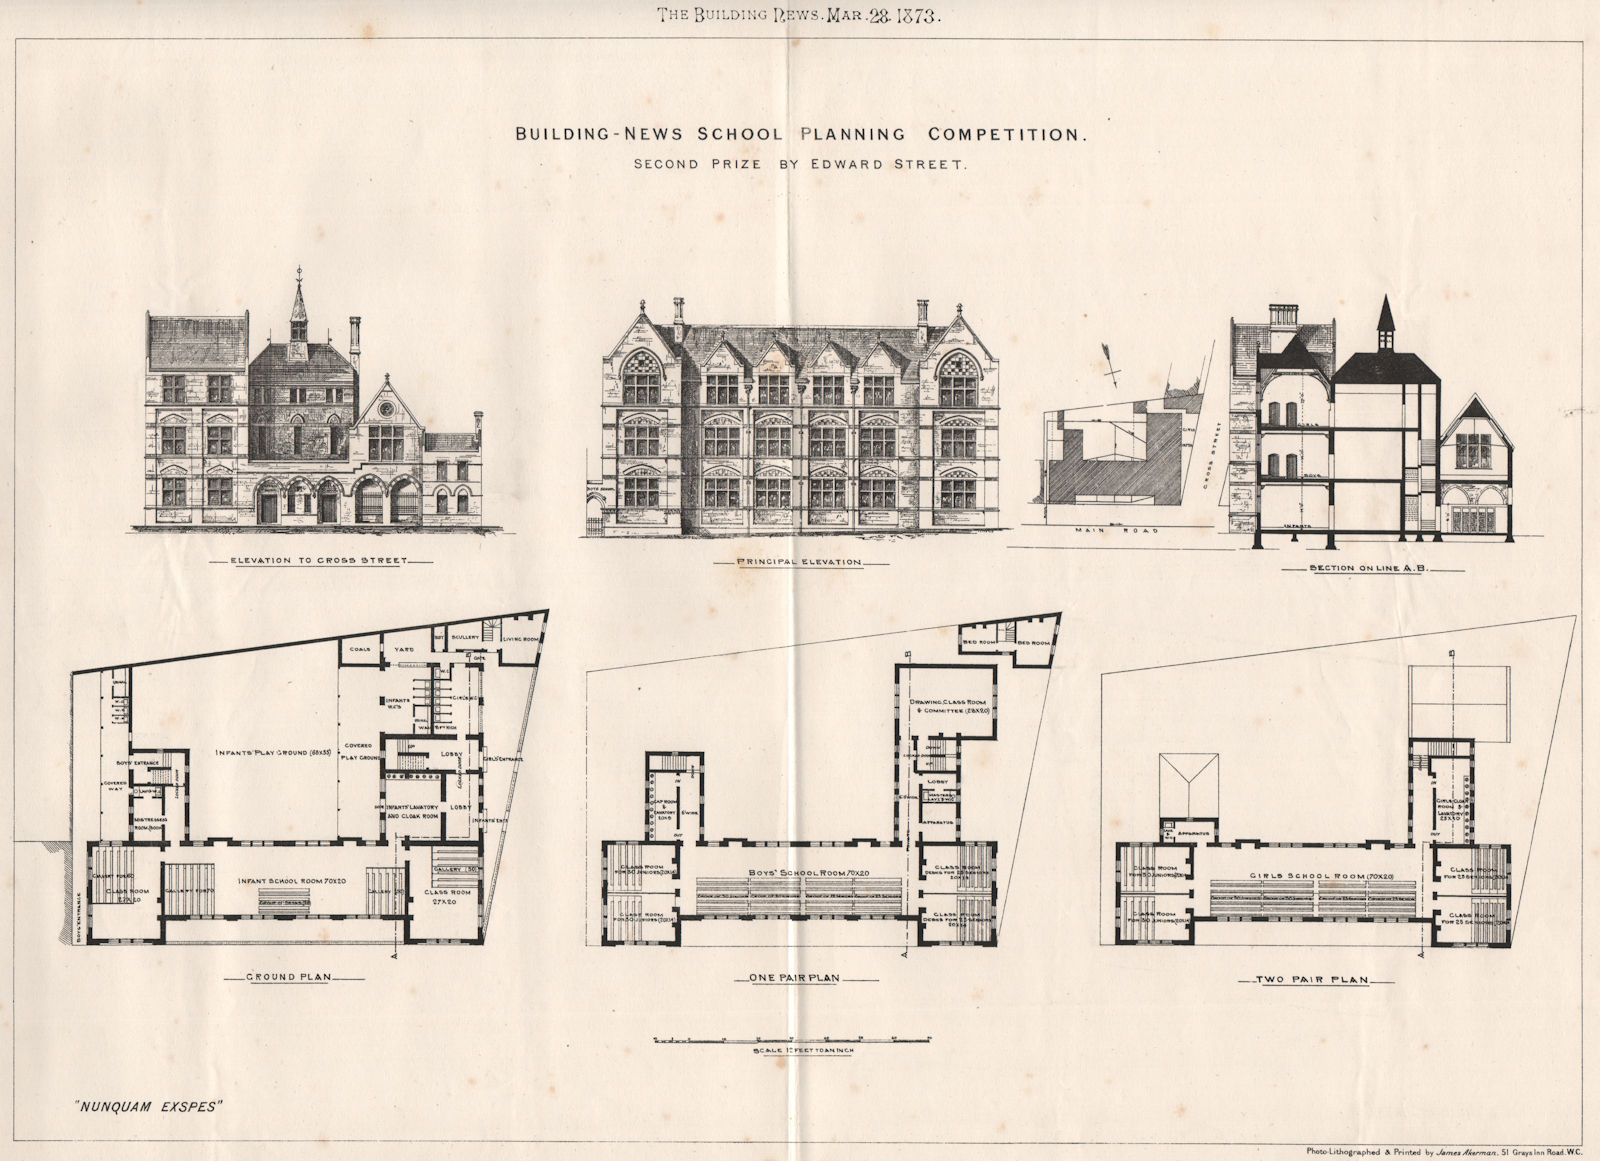 Building News School Planning Competition. Second Prize Edward Street 1873